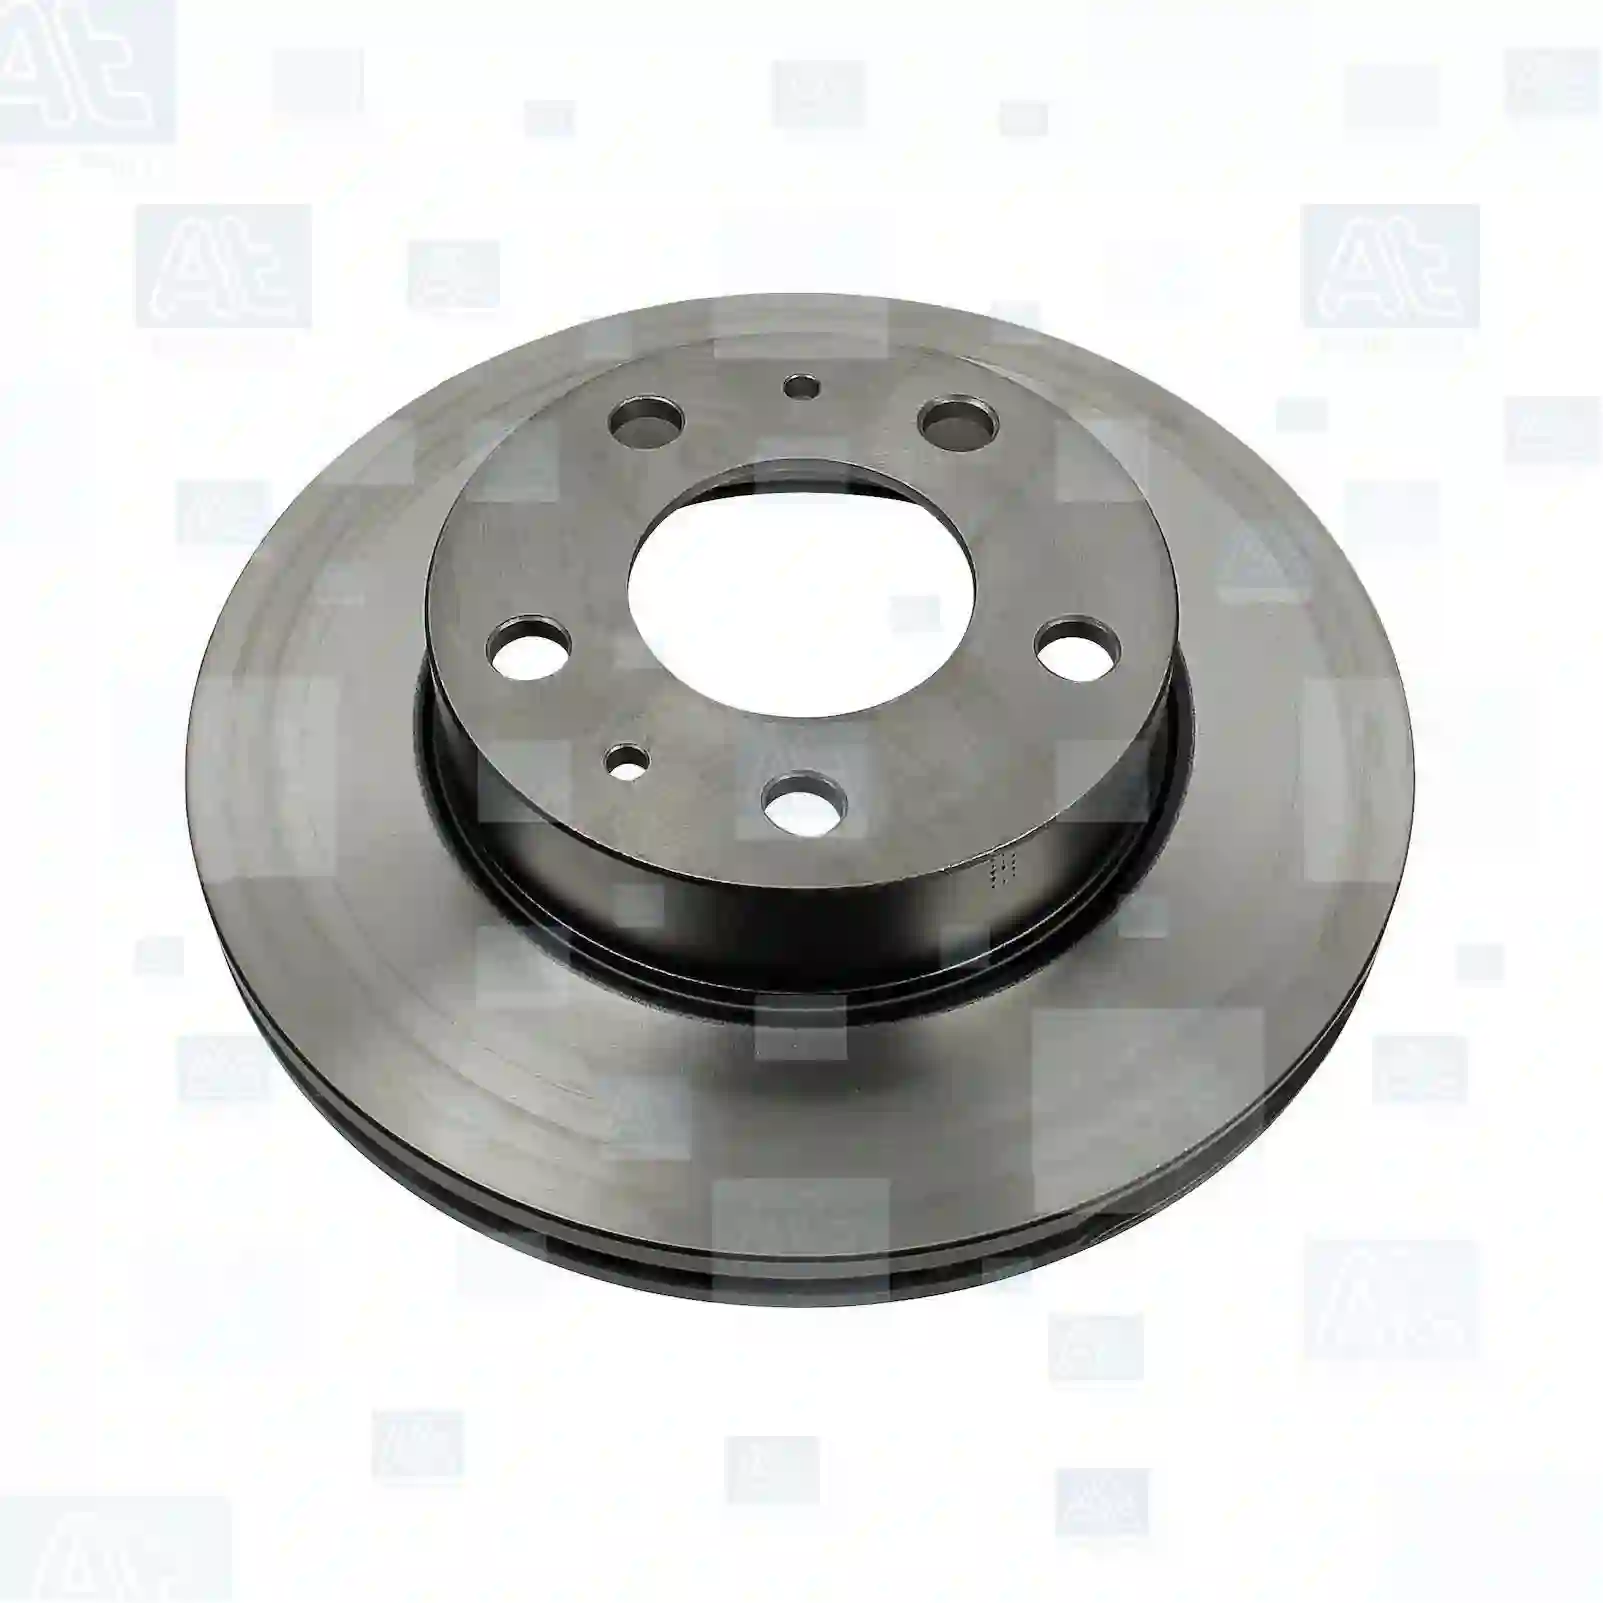 Brake disc, at no 77714736, oem no: 00004246Y3, 1606400780, 1606401680, 1607872280, 1611841680, 4246K2, 4246K3, 4246Y3, 4246Y5, 424935, 424936, 4249A0, 4249E3, 4249G5, 4249H2, 4249H9, 1307356080, 1341045080, 46806234, 51728378, 51740247, 51858362, 51858363, 71739637, 00004246Y3, 1606400780, 1606401680, 1607872280, 1611841680, 4246K2, 4246K3, 4246Y3, 4246Y5, 424935, 424936, 4249A0, 4249E3, 4249G5, 4249H2, 4249H9 At Spare Part | Engine, Accelerator Pedal, Camshaft, Connecting Rod, Crankcase, Crankshaft, Cylinder Head, Engine Suspension Mountings, Exhaust Manifold, Exhaust Gas Recirculation, Filter Kits, Flywheel Housing, General Overhaul Kits, Engine, Intake Manifold, Oil Cleaner, Oil Cooler, Oil Filter, Oil Pump, Oil Sump, Piston & Liner, Sensor & Switch, Timing Case, Turbocharger, Cooling System, Belt Tensioner, Coolant Filter, Coolant Pipe, Corrosion Prevention Agent, Drive, Expansion Tank, Fan, Intercooler, Monitors & Gauges, Radiator, Thermostat, V-Belt / Timing belt, Water Pump, Fuel System, Electronical Injector Unit, Feed Pump, Fuel Filter, cpl., Fuel Gauge Sender,  Fuel Line, Fuel Pump, Fuel Tank, Injection Line Kit, Injection Pump, Exhaust System, Clutch & Pedal, Gearbox, Propeller Shaft, Axles, Brake System, Hubs & Wheels, Suspension, Leaf Spring, Universal Parts / Accessories, Steering, Electrical System, Cabin Brake disc, at no 77714736, oem no: 00004246Y3, 1606400780, 1606401680, 1607872280, 1611841680, 4246K2, 4246K3, 4246Y3, 4246Y5, 424935, 424936, 4249A0, 4249E3, 4249G5, 4249H2, 4249H9, 1307356080, 1341045080, 46806234, 51728378, 51740247, 51858362, 51858363, 71739637, 00004246Y3, 1606400780, 1606401680, 1607872280, 1611841680, 4246K2, 4246K3, 4246Y3, 4246Y5, 424935, 424936, 4249A0, 4249E3, 4249G5, 4249H2, 4249H9 At Spare Part | Engine, Accelerator Pedal, Camshaft, Connecting Rod, Crankcase, Crankshaft, Cylinder Head, Engine Suspension Mountings, Exhaust Manifold, Exhaust Gas Recirculation, Filter Kits, Flywheel Housing, General Overhaul Kits, Engine, Intake Manifold, Oil Cleaner, Oil Cooler, Oil Filter, Oil Pump, Oil Sump, Piston & Liner, Sensor & Switch, Timing Case, Turbocharger, Cooling System, Belt Tensioner, Coolant Filter, Coolant Pipe, Corrosion Prevention Agent, Drive, Expansion Tank, Fan, Intercooler, Monitors & Gauges, Radiator, Thermostat, V-Belt / Timing belt, Water Pump, Fuel System, Electronical Injector Unit, Feed Pump, Fuel Filter, cpl., Fuel Gauge Sender,  Fuel Line, Fuel Pump, Fuel Tank, Injection Line Kit, Injection Pump, Exhaust System, Clutch & Pedal, Gearbox, Propeller Shaft, Axles, Brake System, Hubs & Wheels, Suspension, Leaf Spring, Universal Parts / Accessories, Steering, Electrical System, Cabin